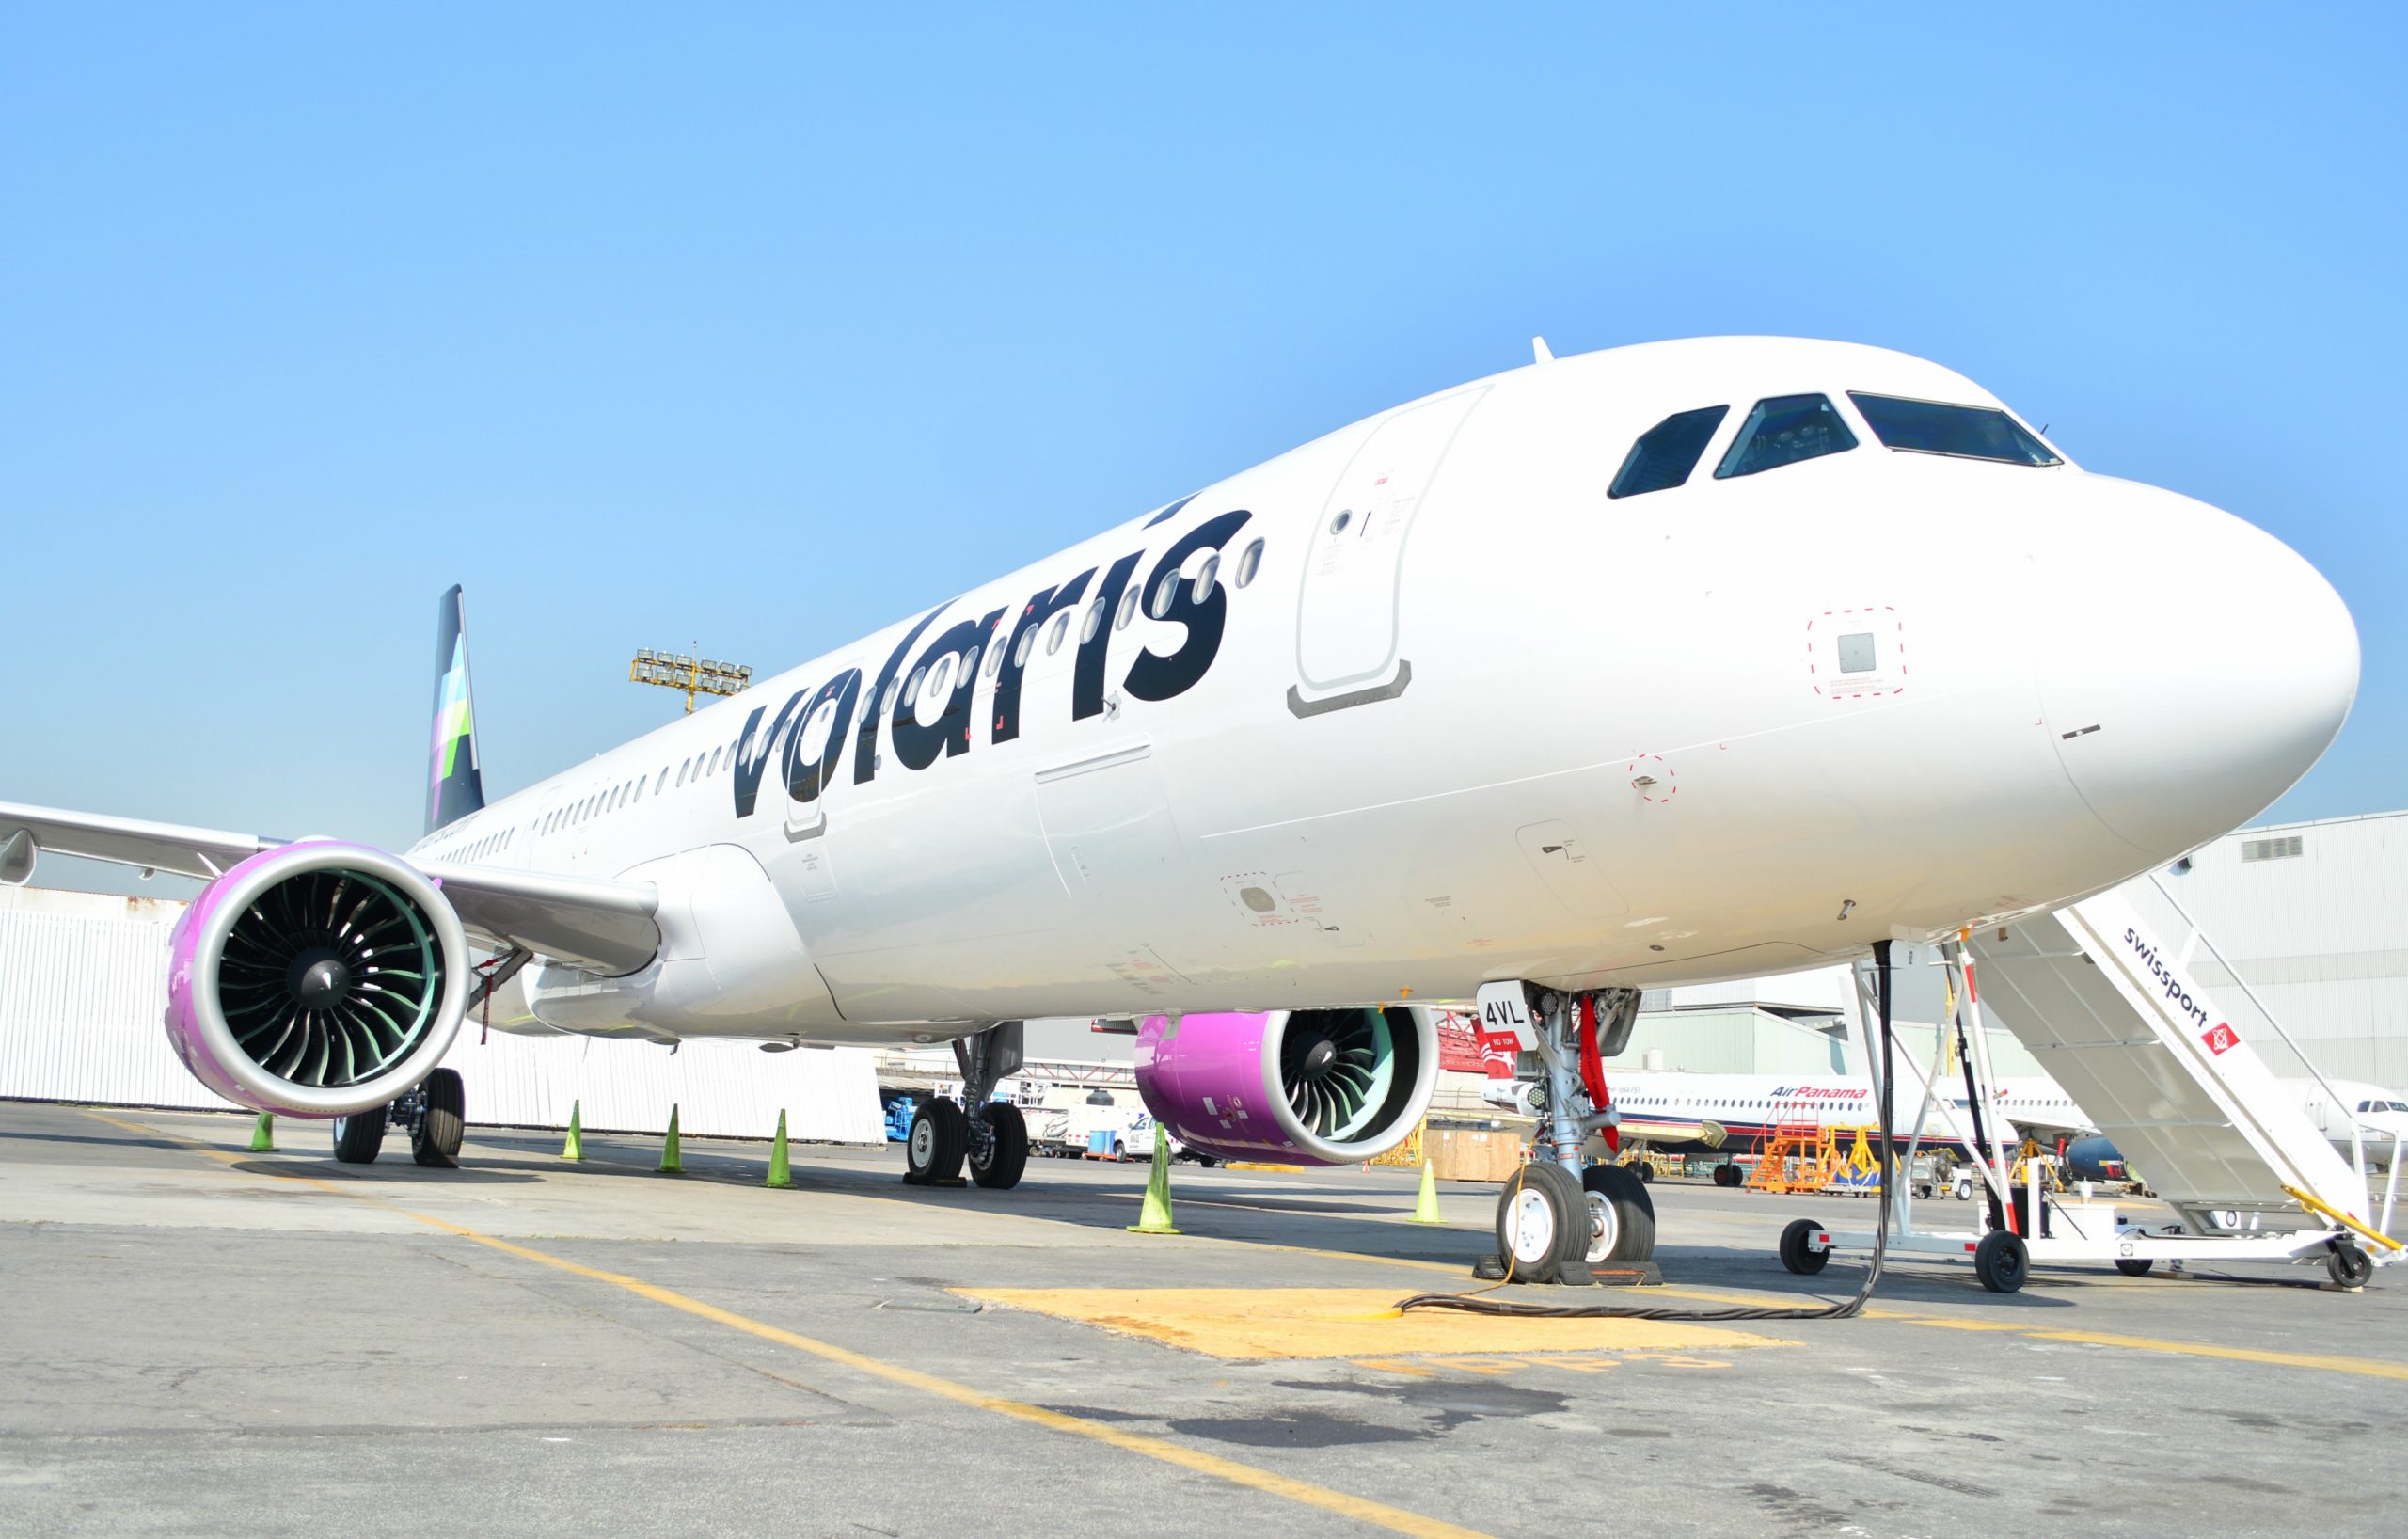 Volaris will increase its operations in Chihuahua by 51%